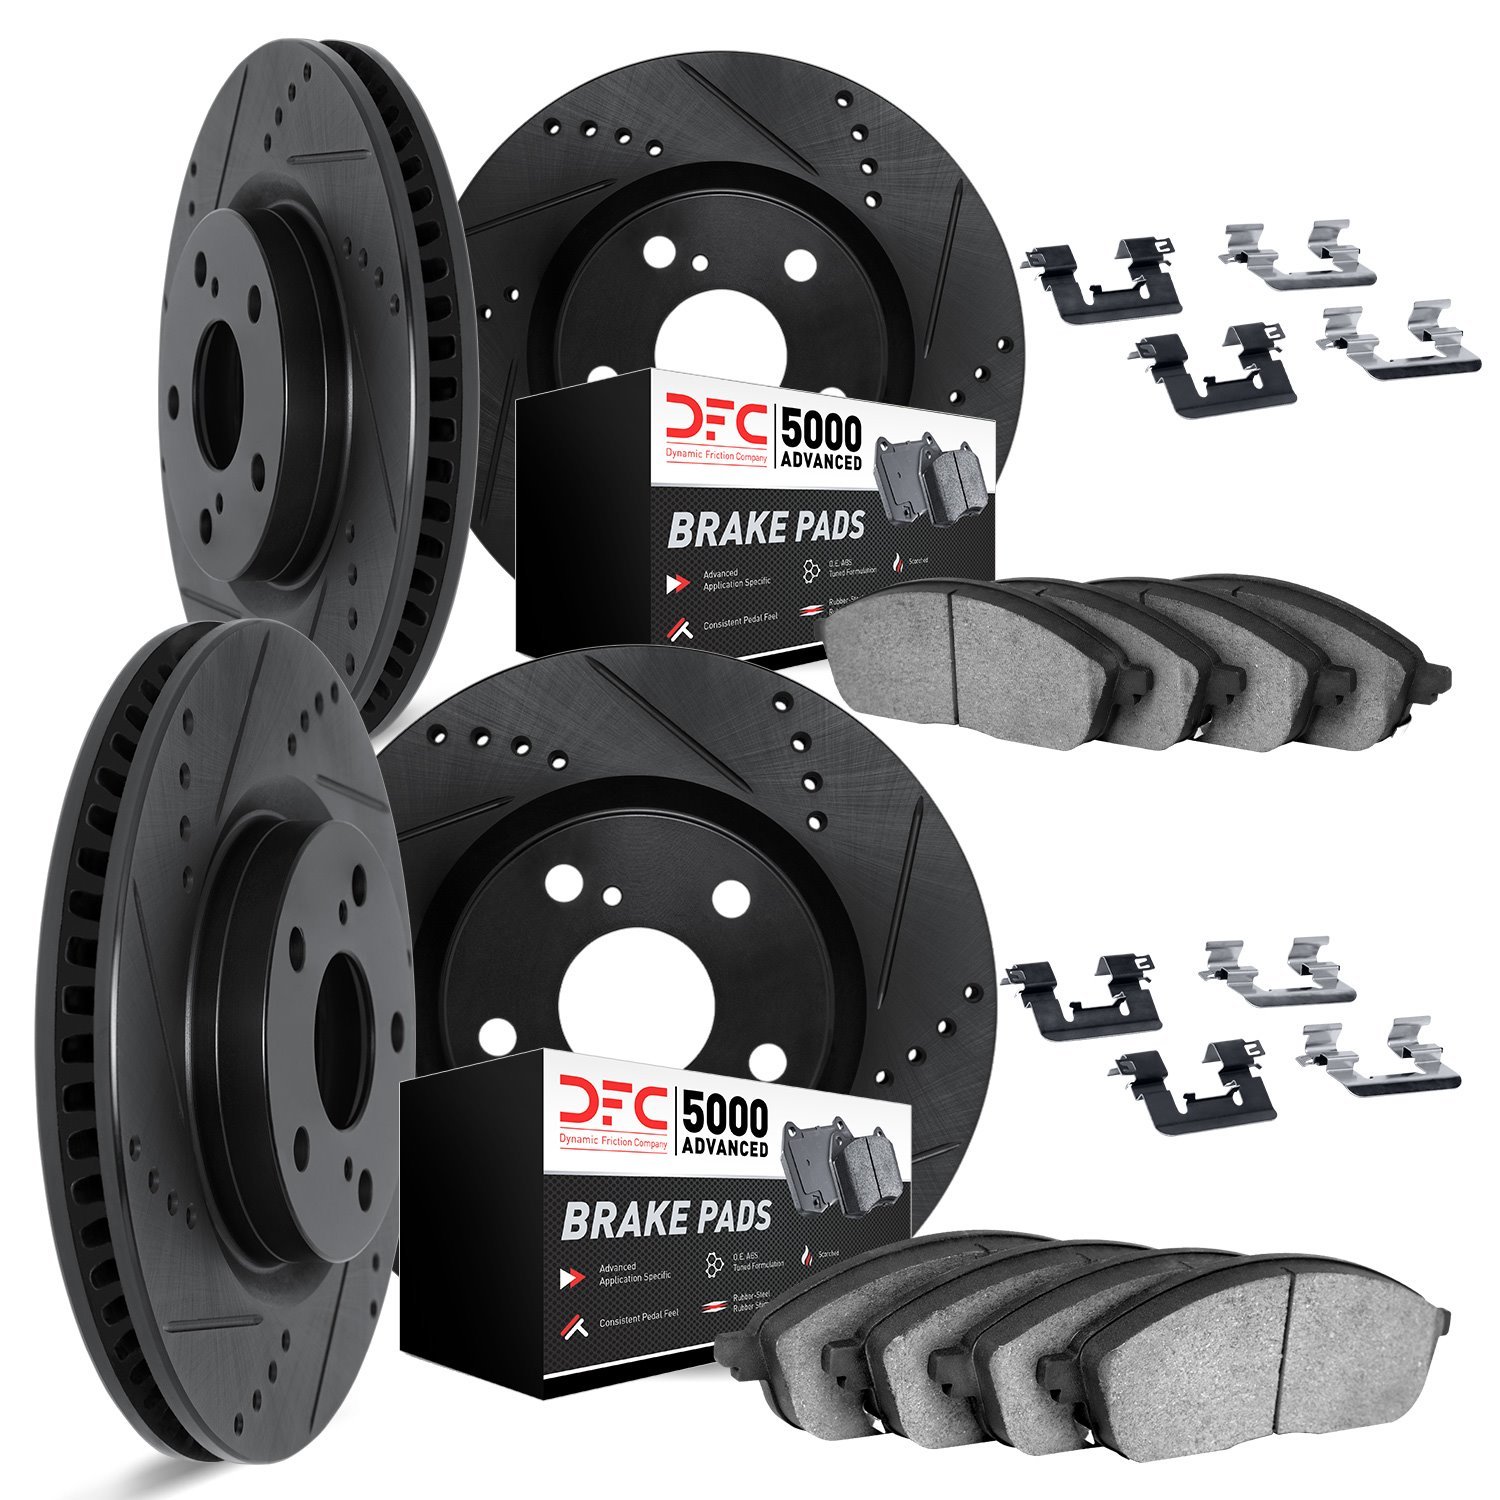 8514-31015 Drilled/Slotted Brake Rotors w/5000 Advanced Brake Pads Kit & Hardware [Black], 2006-2007 BMW, Position: Front and Re